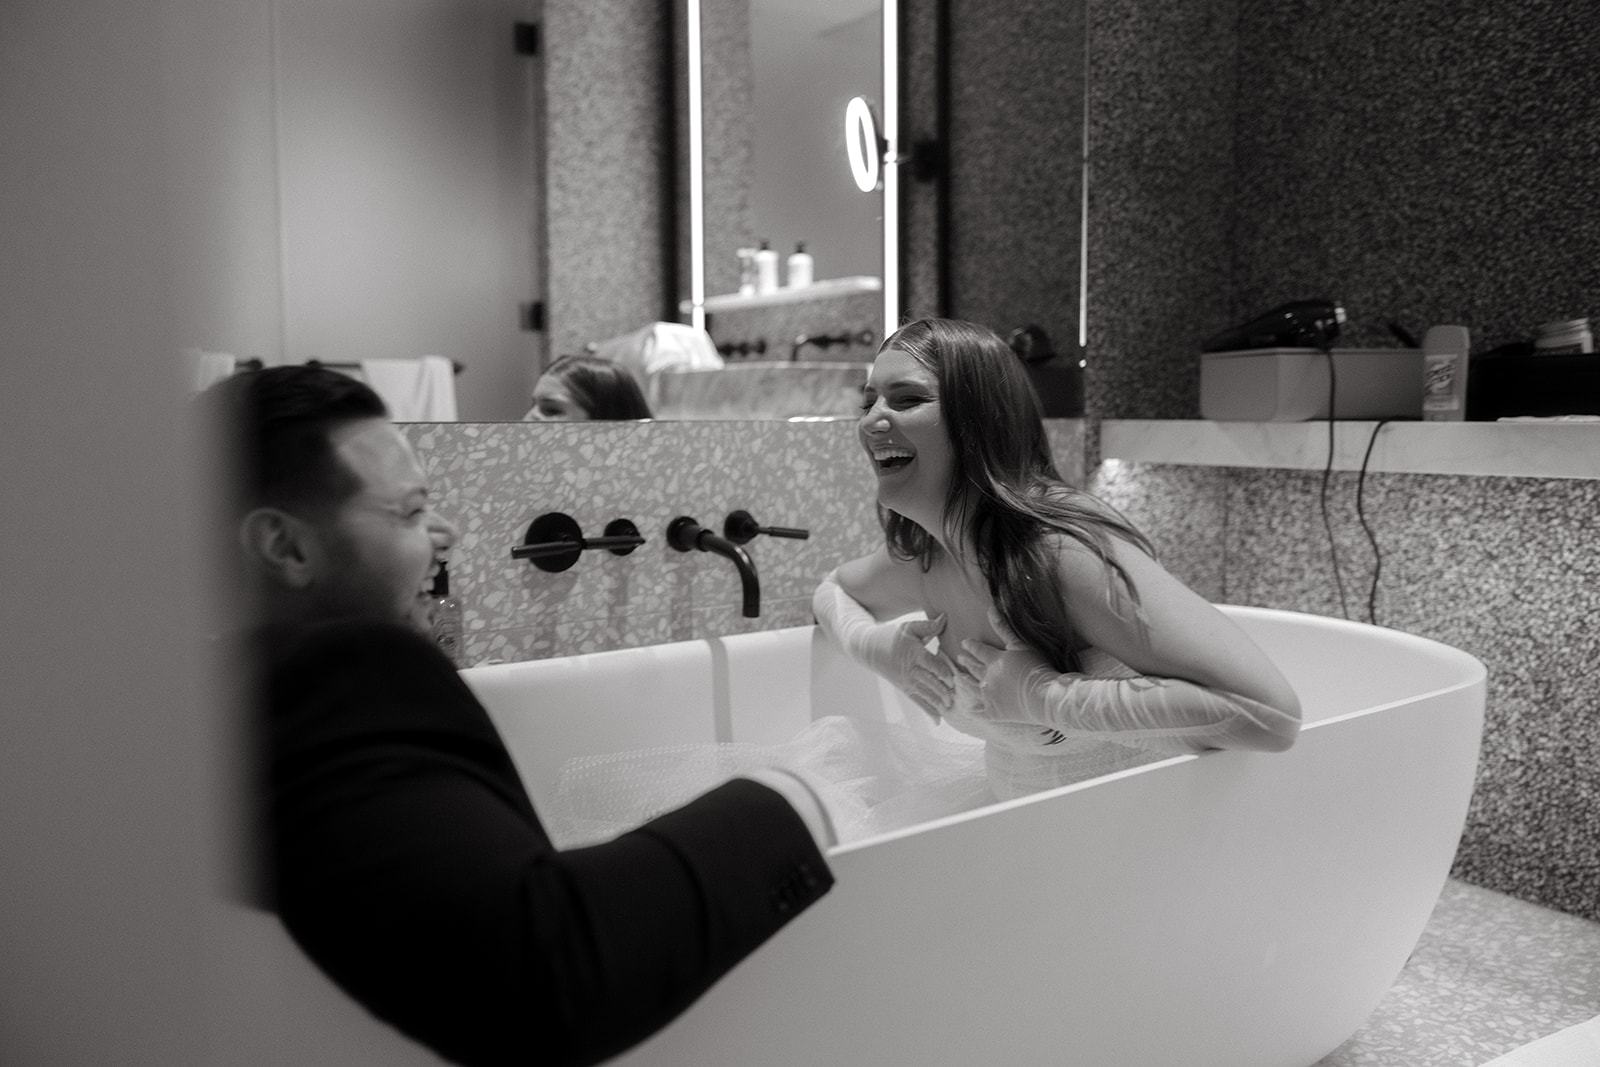 A couple who eloped in NYC sit in their hotel bathtub and laugh together